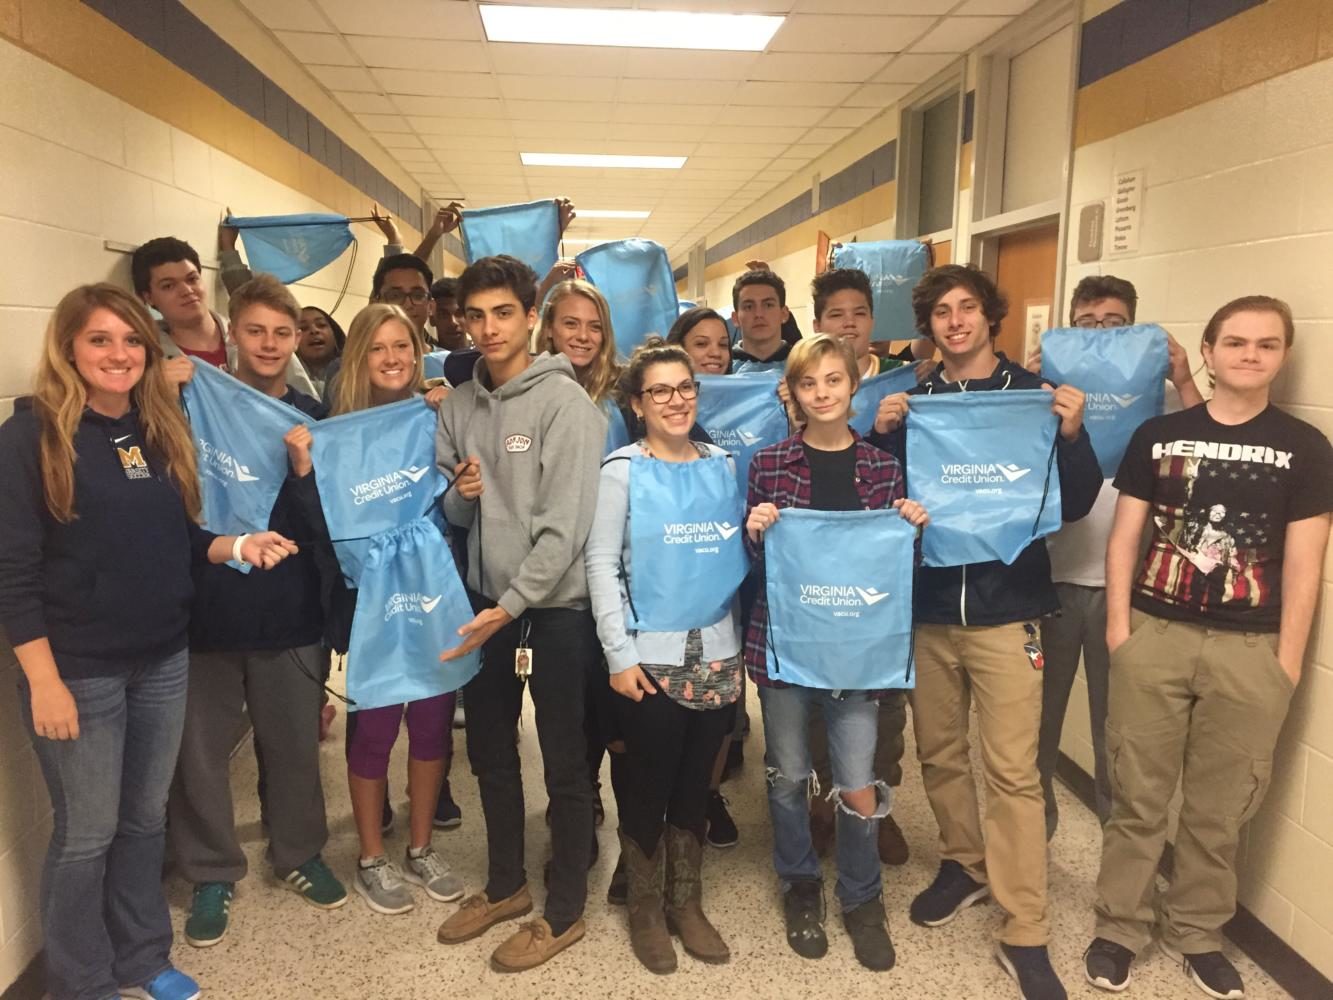 Ms. Kramers class shows off their drawstring bags from Virginia Credit Union.